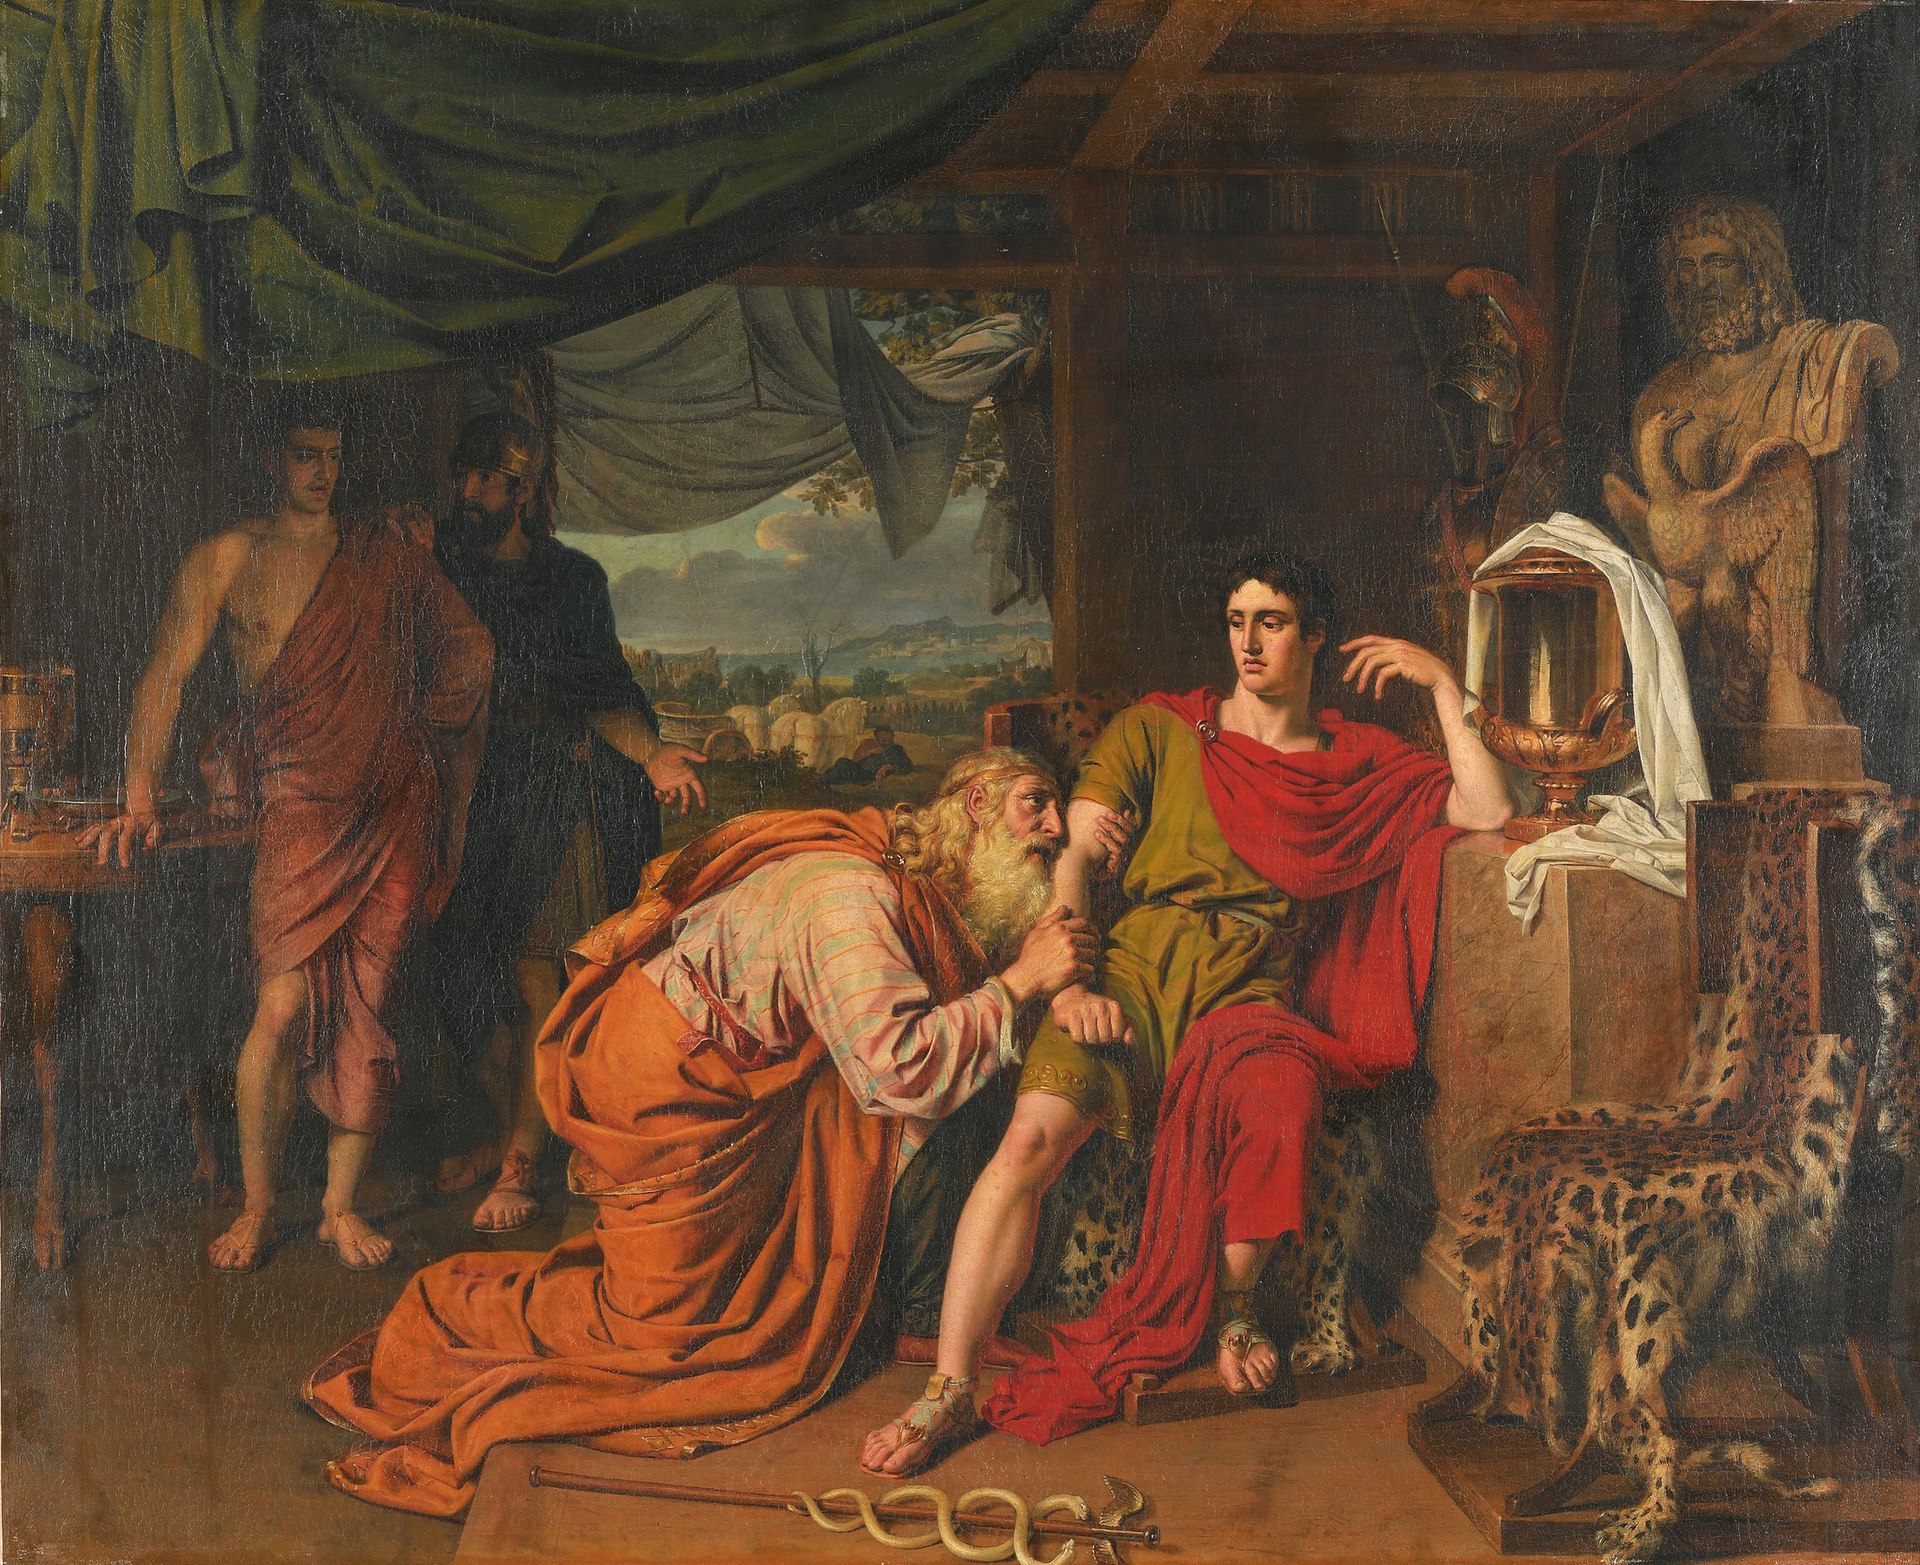 Priam asks Achilles to return Hector's body by Alexander Ivanov